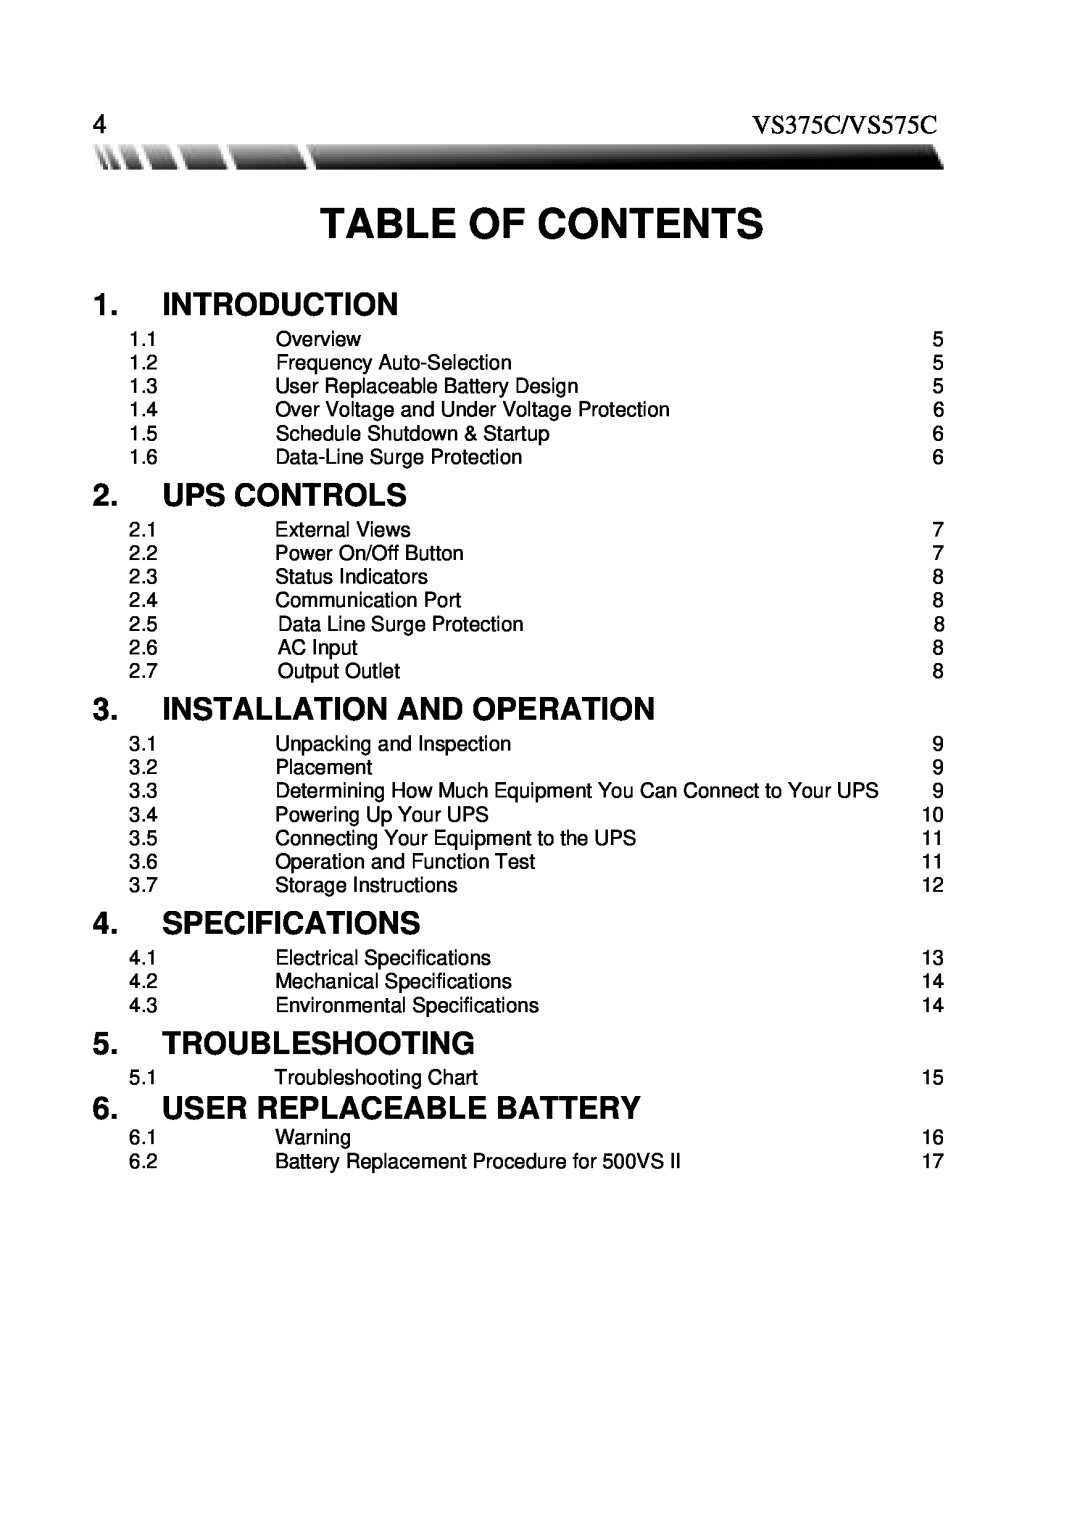 ViewSonic manual Introduction, Ups Controls, Installation And Operation, Specifications, Troubleshooting, VS375C/VS575C 